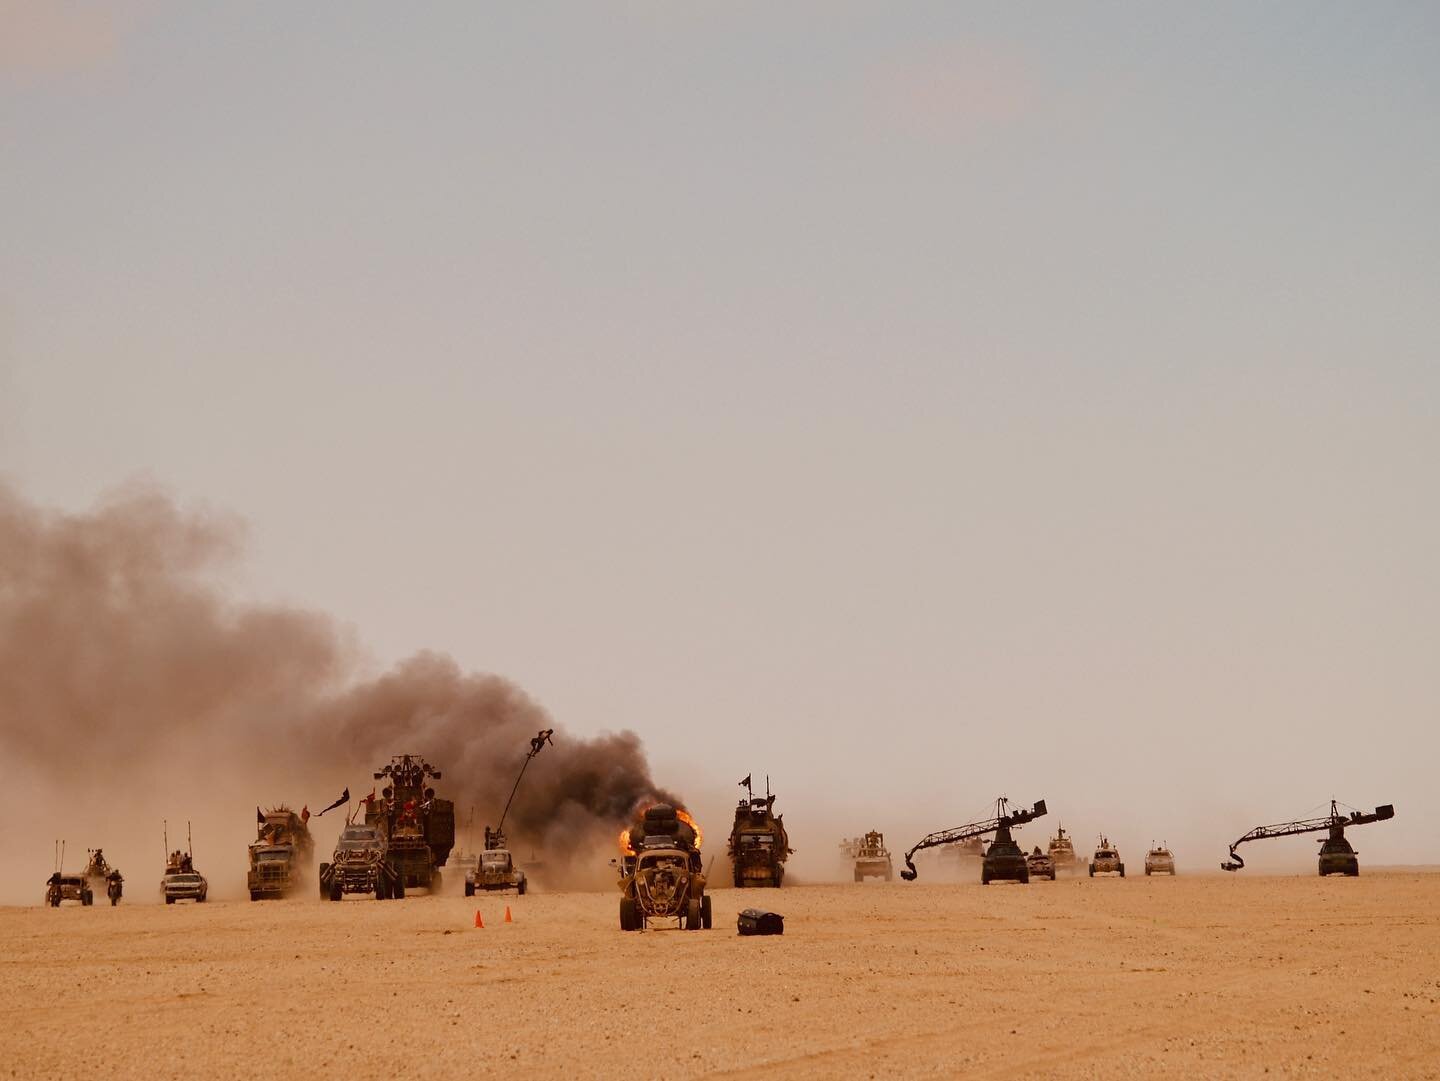 Not many other vehicles can make ours look small in comparison, but the War Rig and other speciality vehicles from Mad Max Fury Road were the exception!

#filmmaking #behindthescenes #cinematography #stunts #madmax #madmaxfuryroad #furyroad #customca